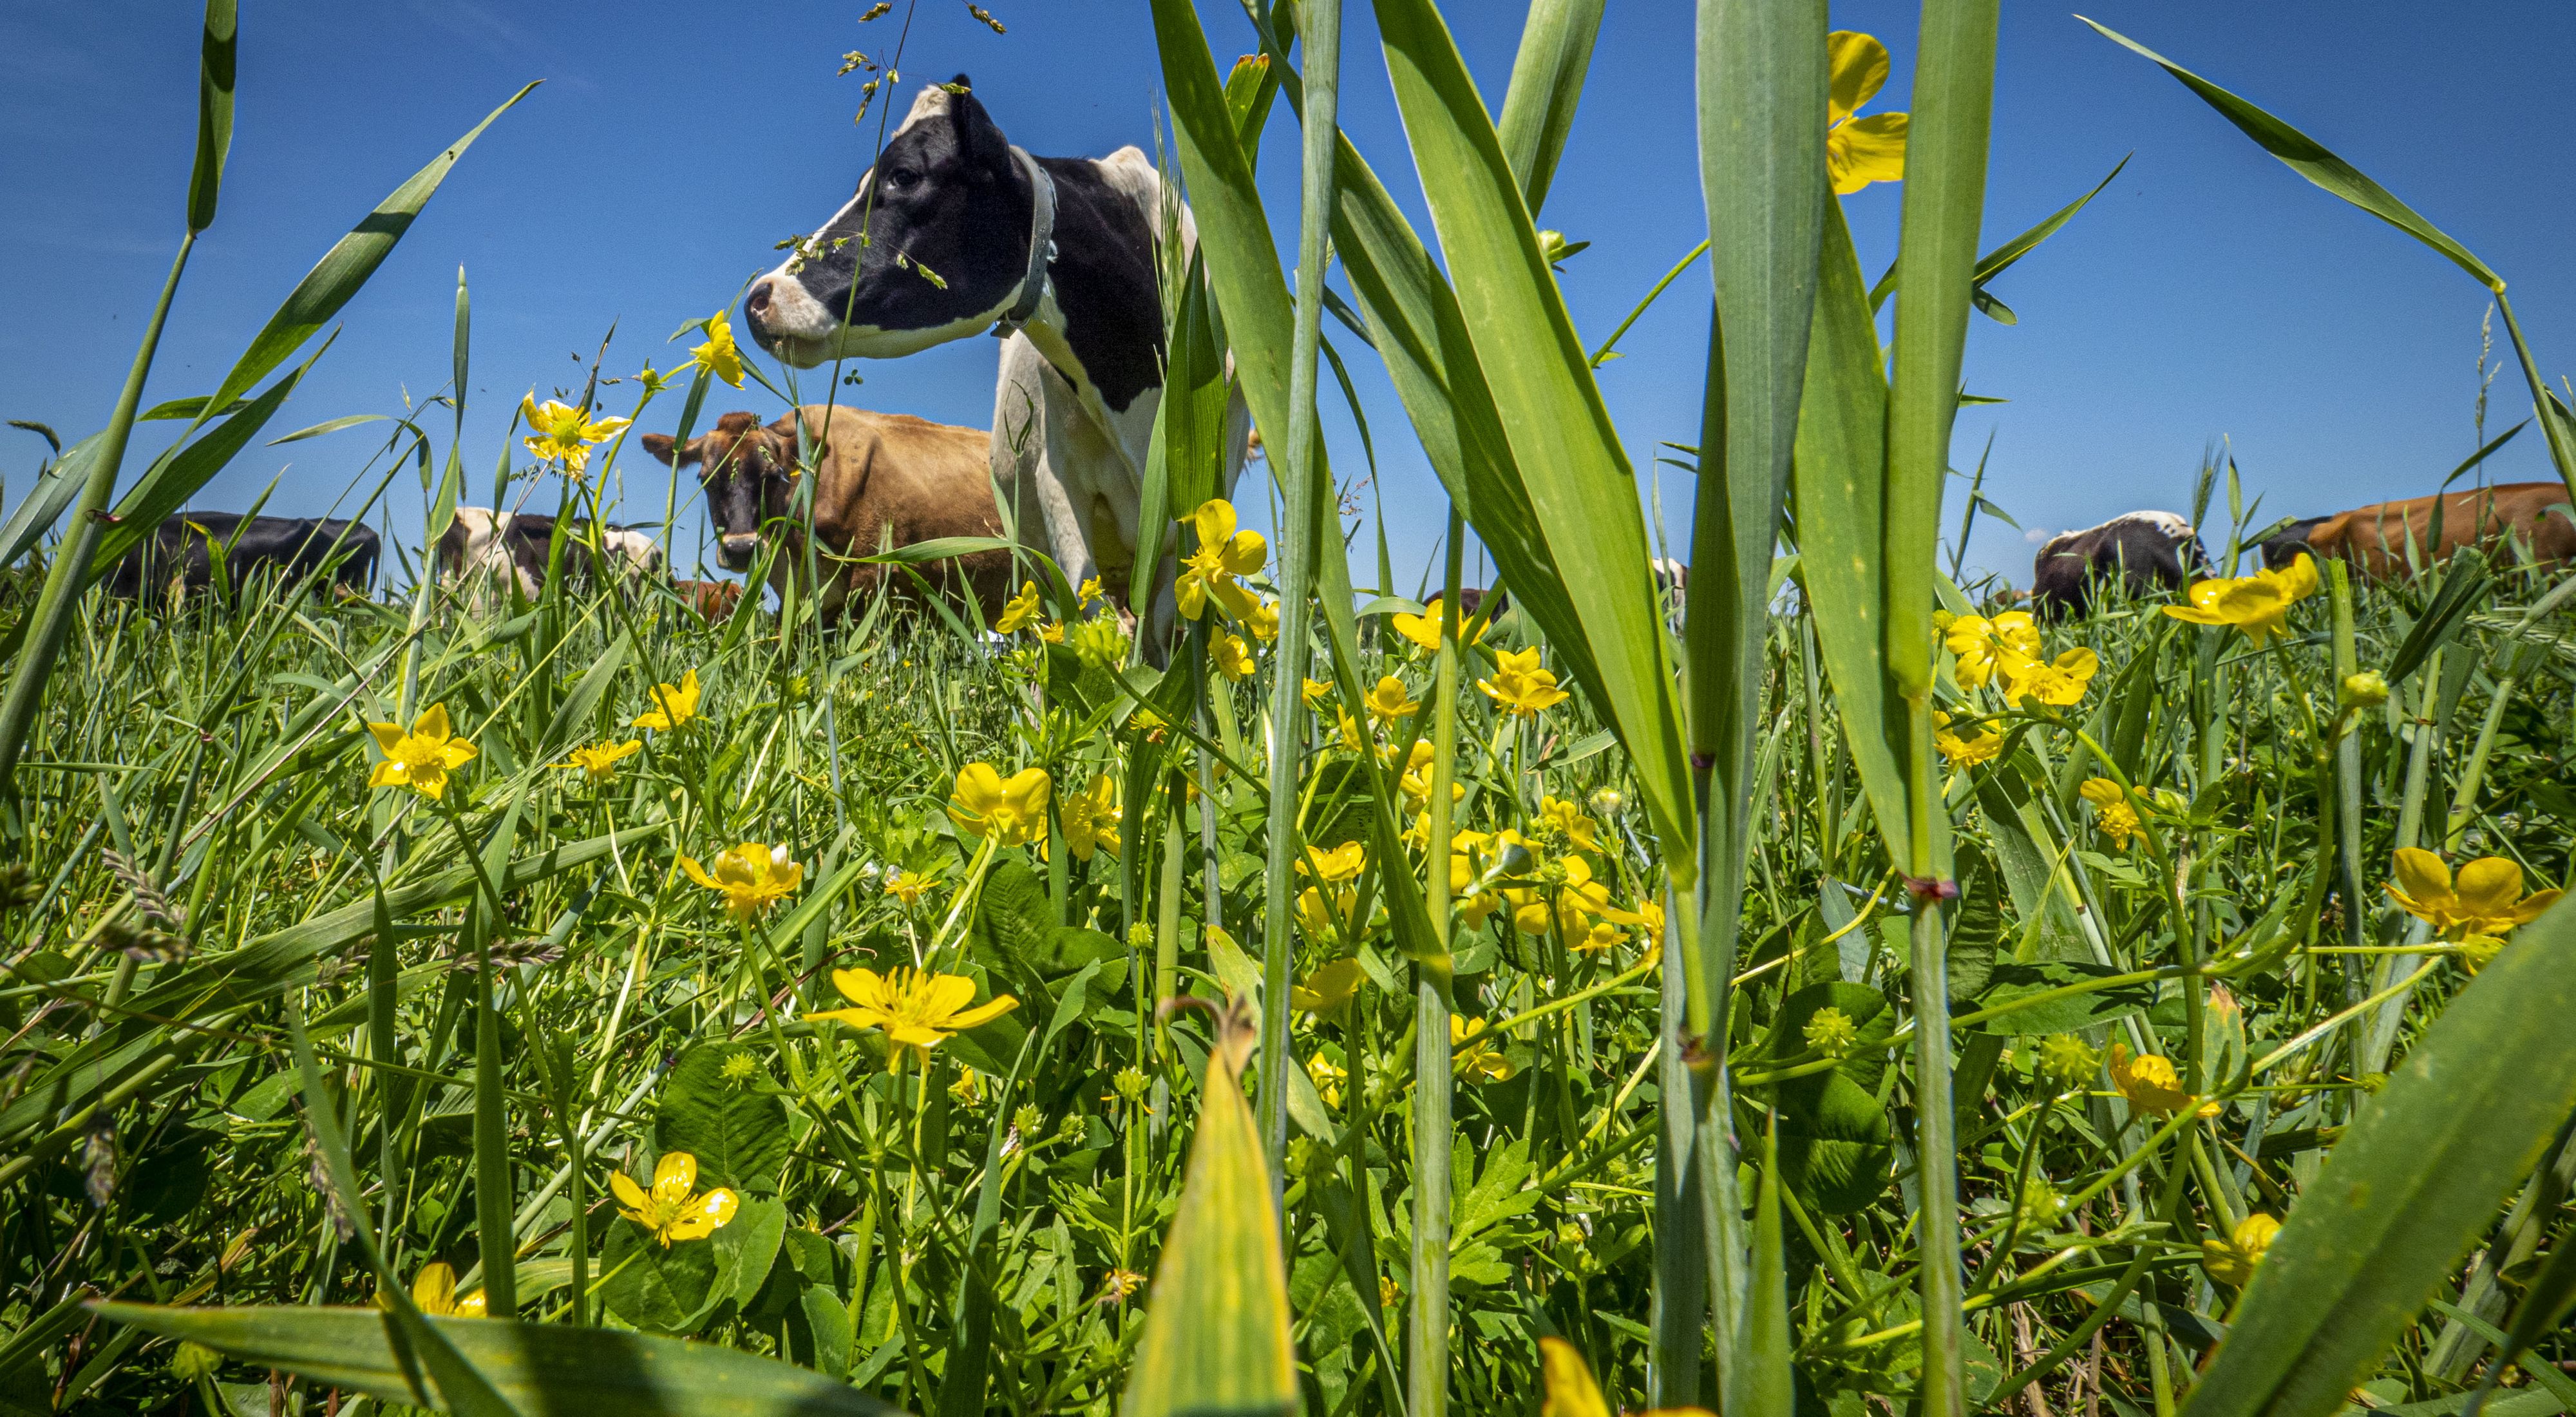 Photo of two or three cows from the low, grass angle, showing grass and sky.